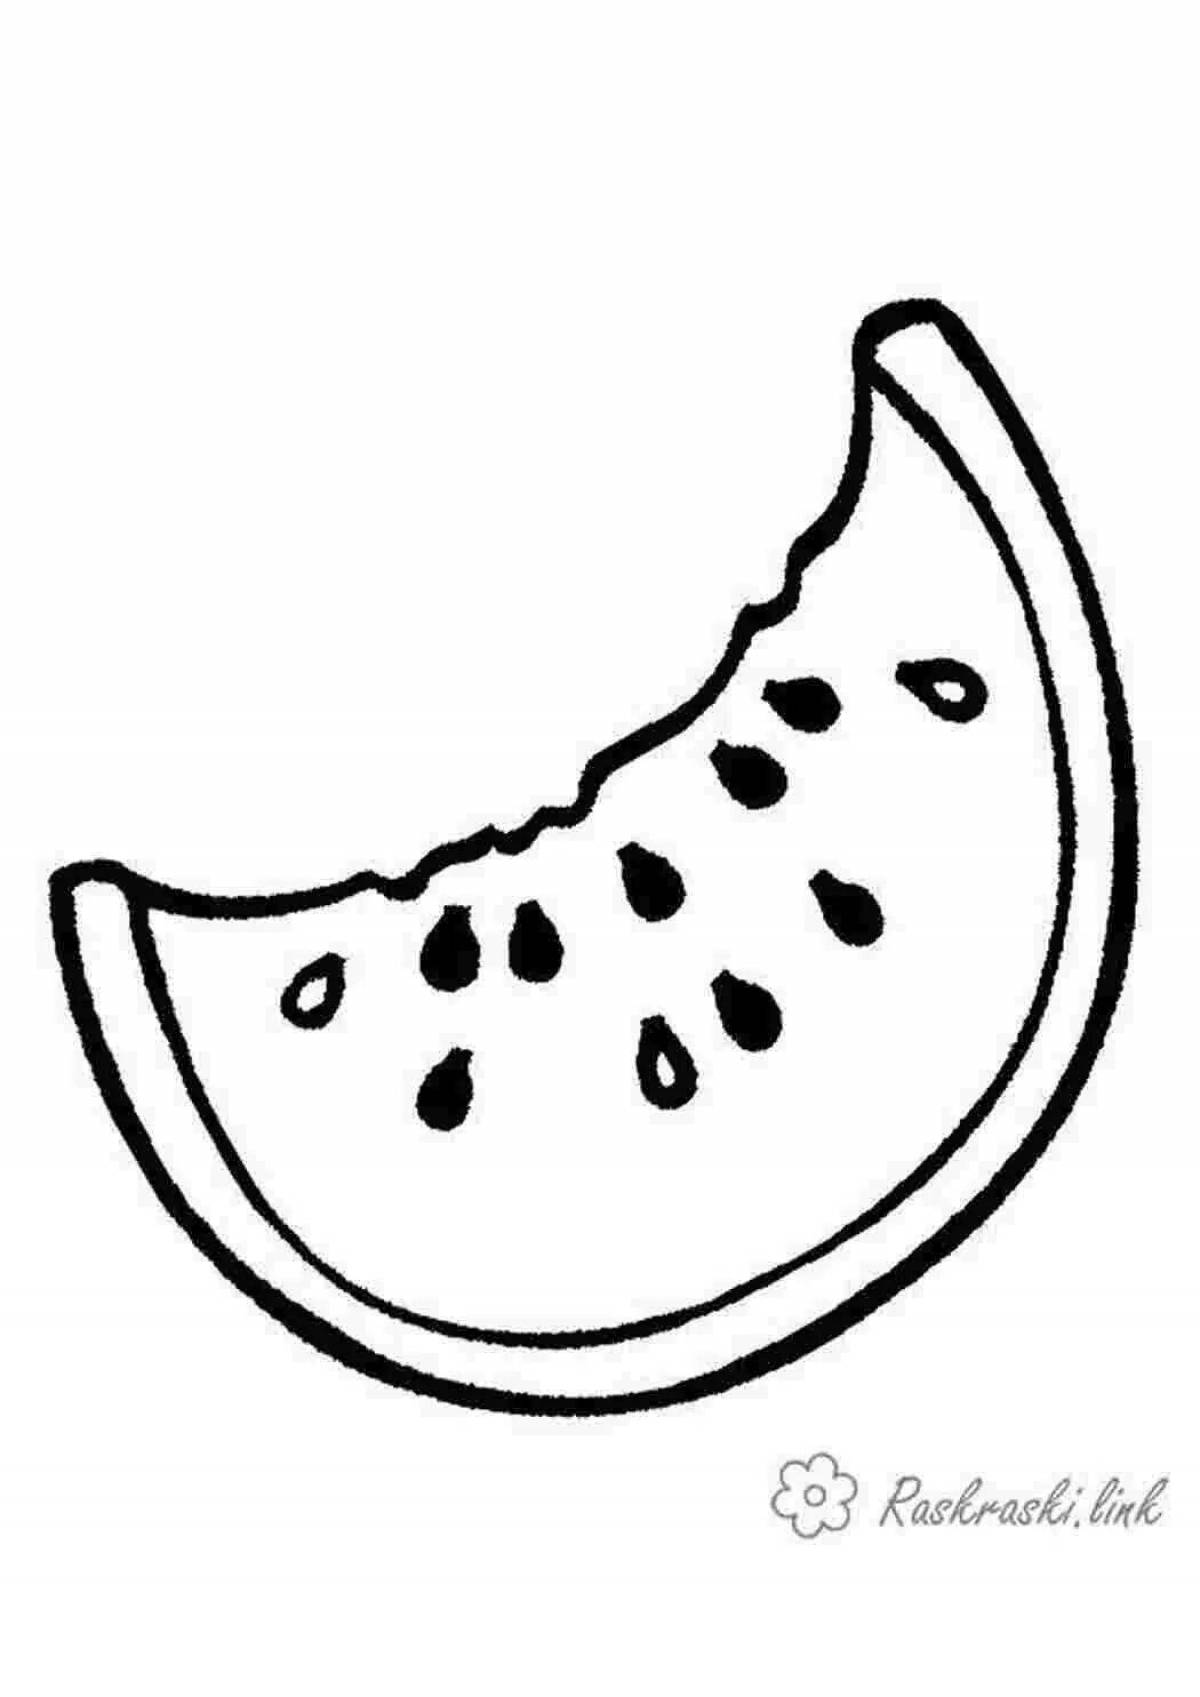 Watermelon slice coloring page